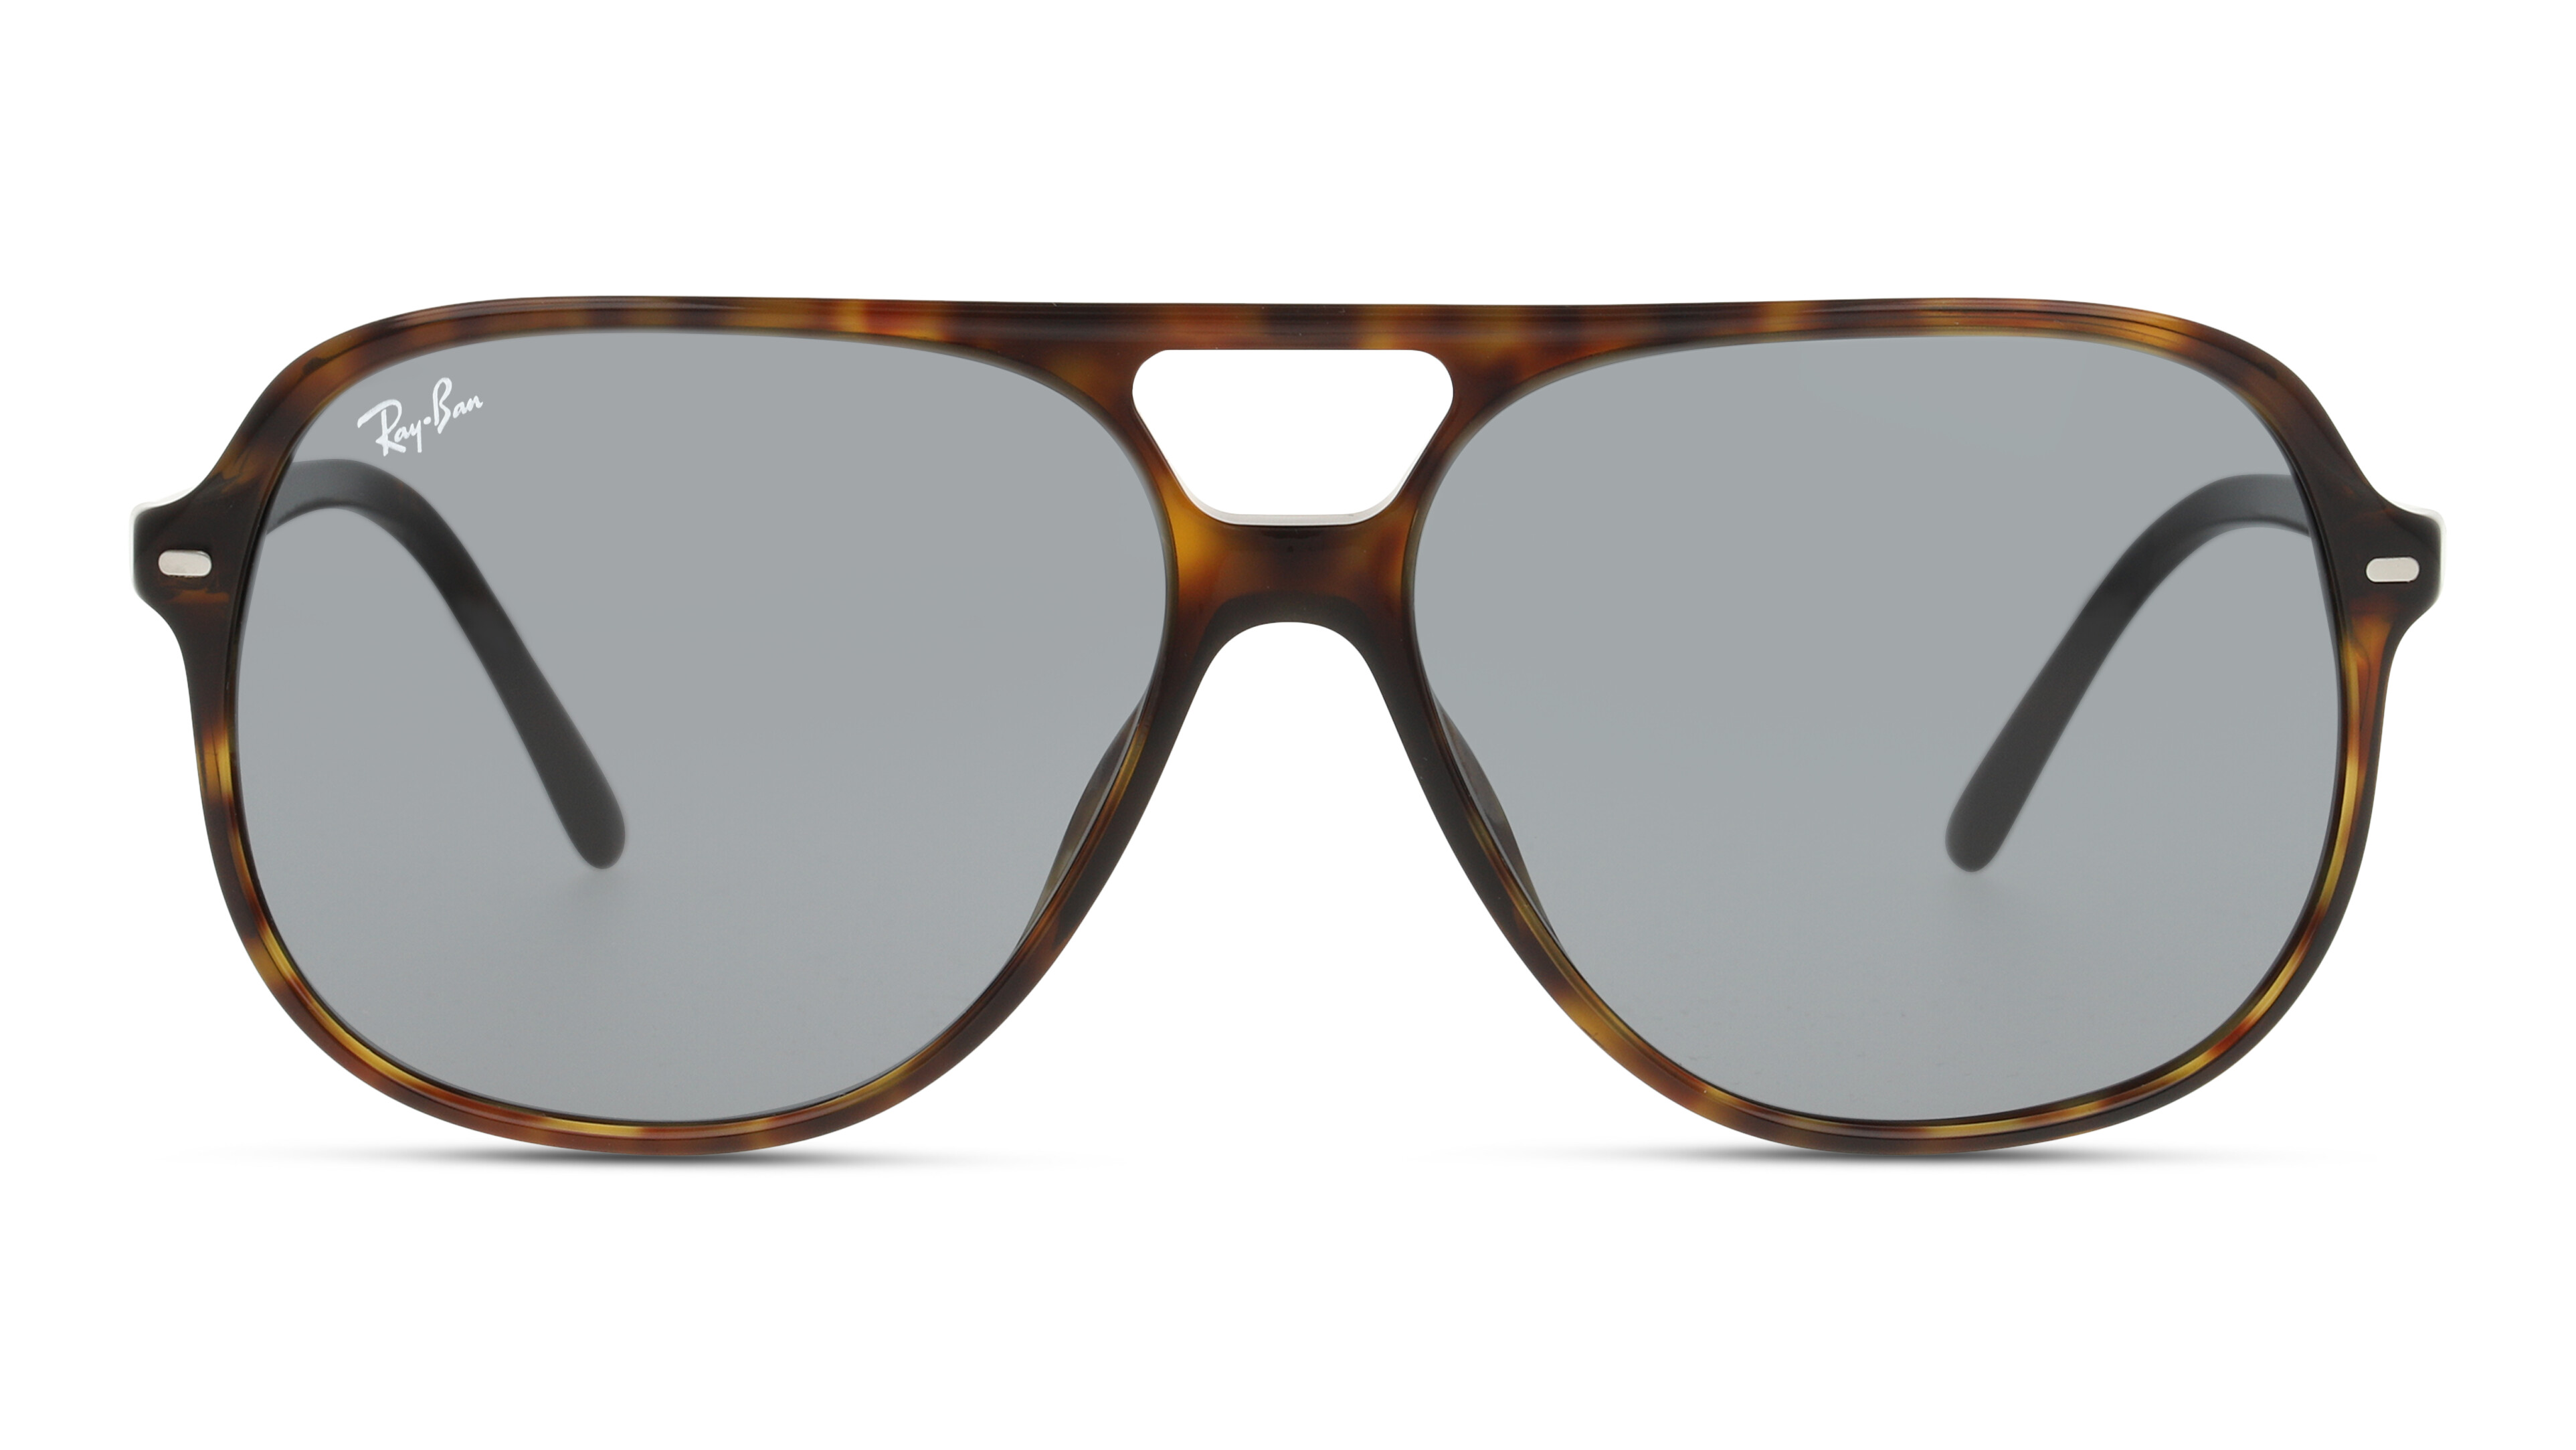 [products.image.front] Ray-Ban BILL 0RB2198 902/R5 Sonnenbrille